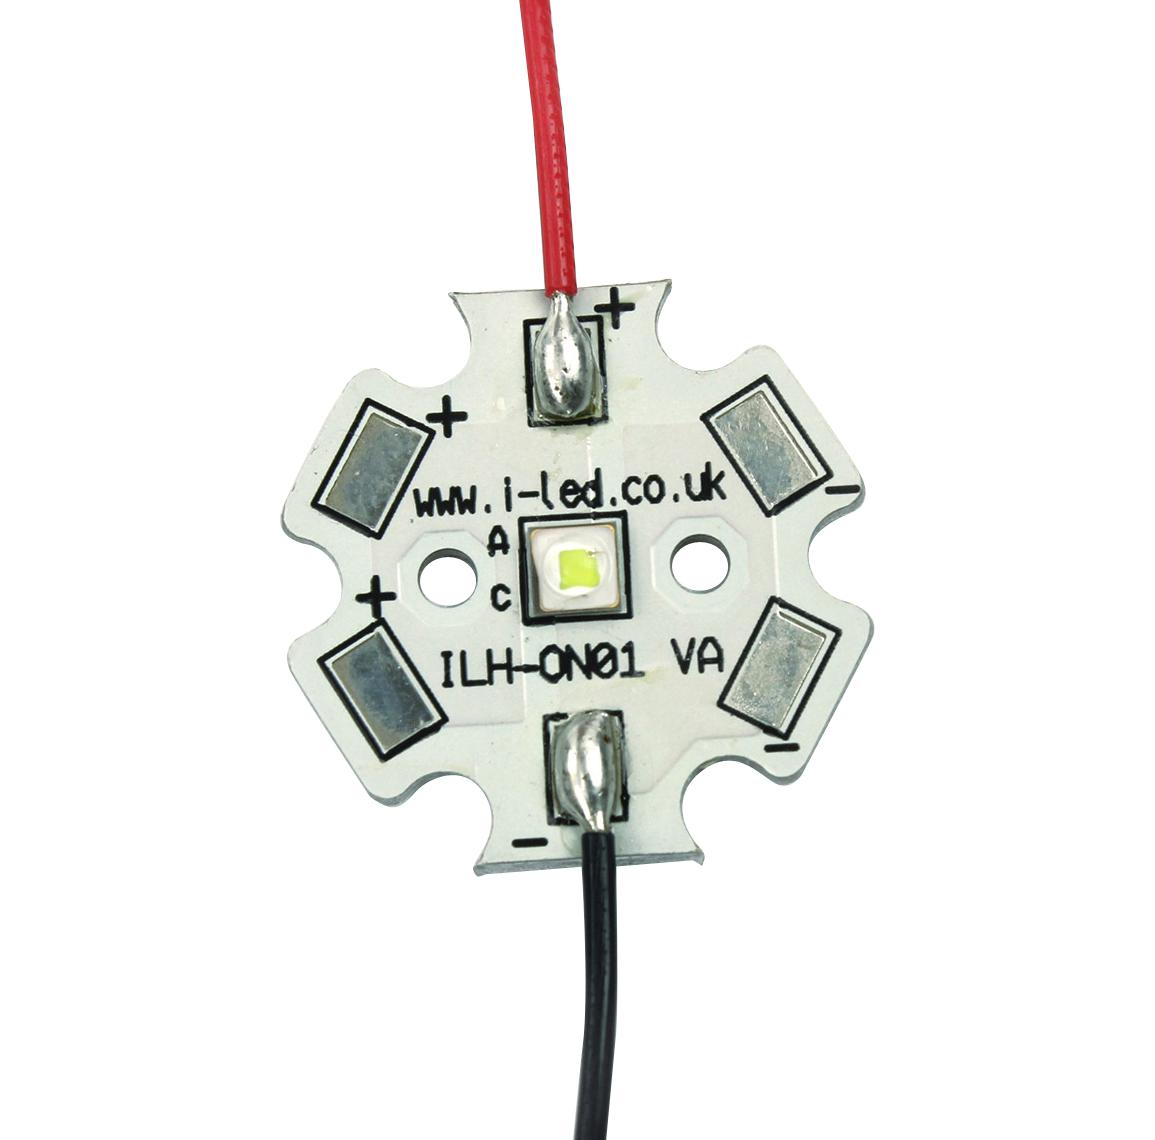 ILH-OW01-ULWH-SC211-WIR200. LED MOD, ULTRA WHT, 6500K, 130LM, 0.99W INTELLIGENT LED SOLUTIONS